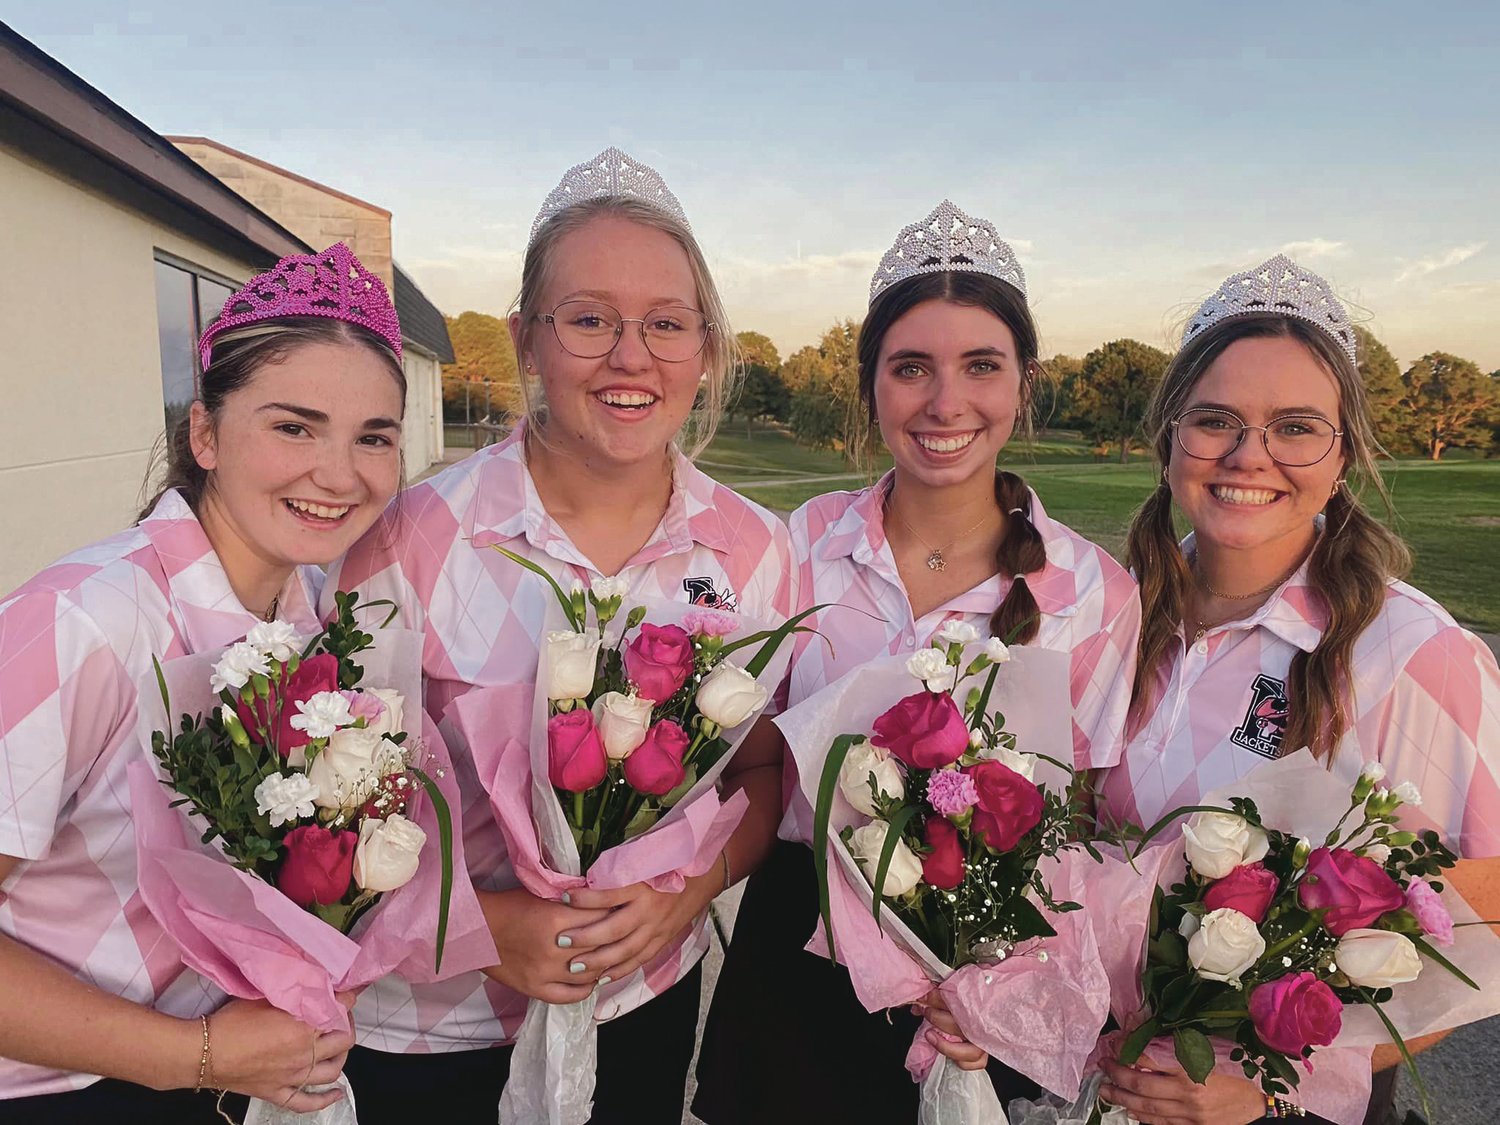 Pictured are the four Lebanon High School golf seniors. Pictured from left, are Emma Hough, Brandi Leifer, Libbee Hays, and Katie Hopkins.